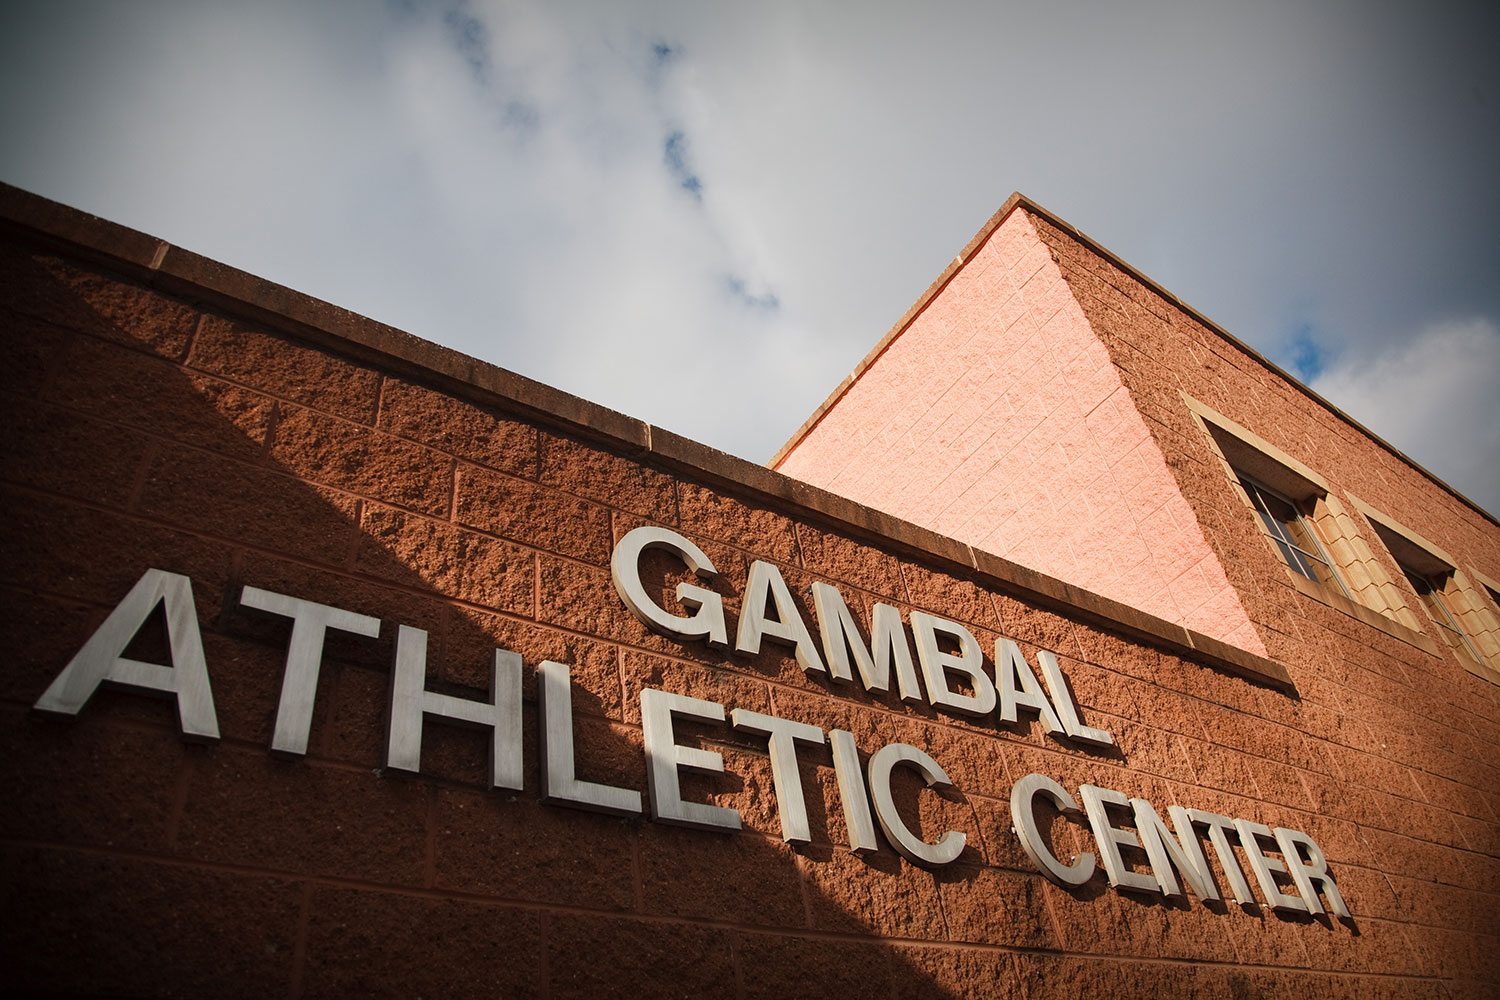 Keystone College alumni benefits and services give access to Gambal Athletic Center